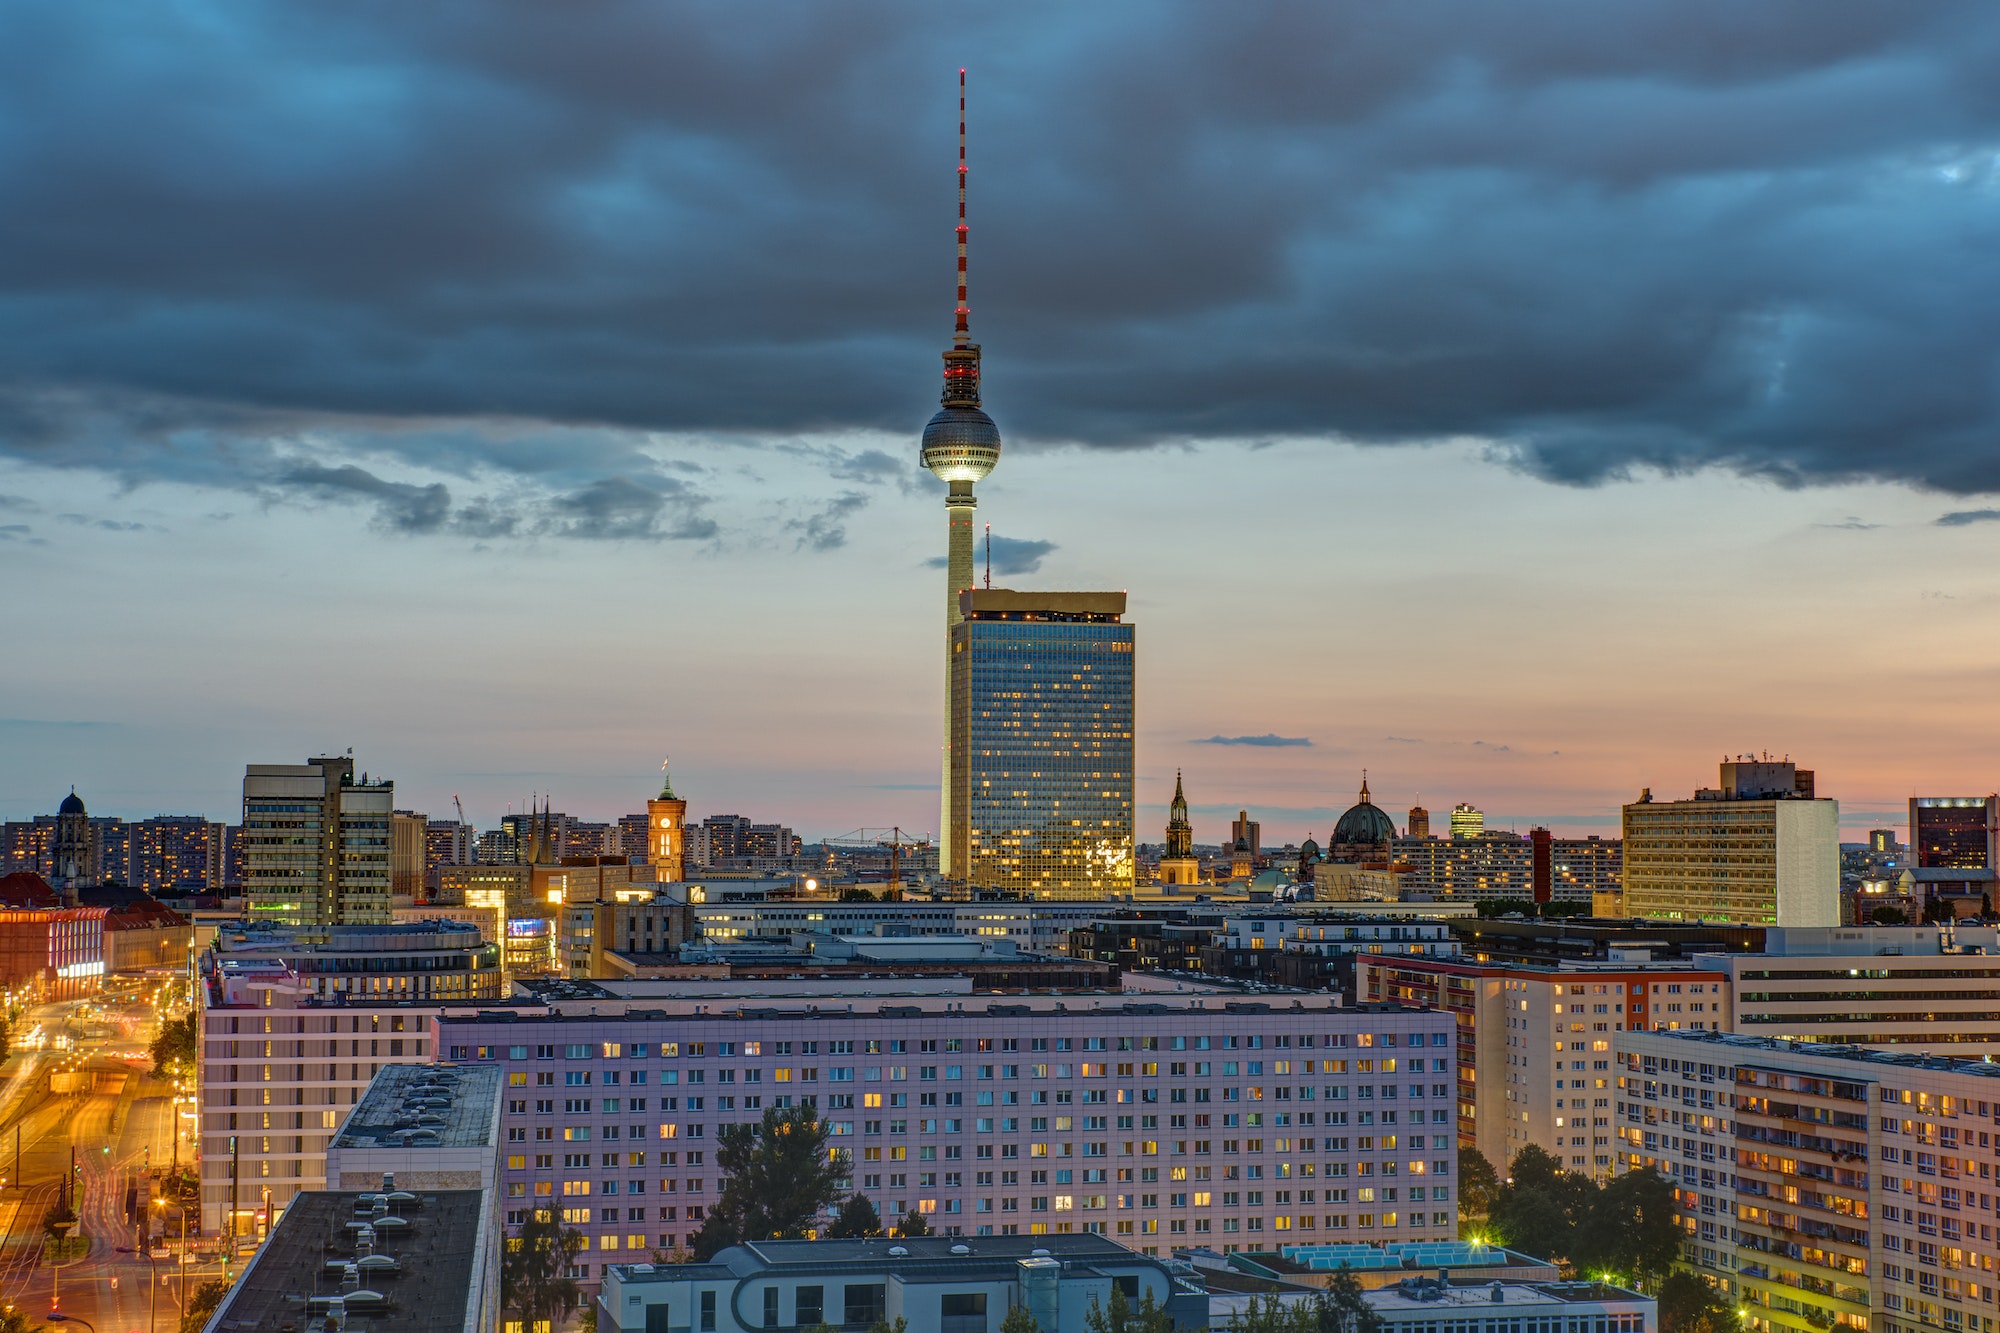 Downtown Berlin with the famous Television Tower